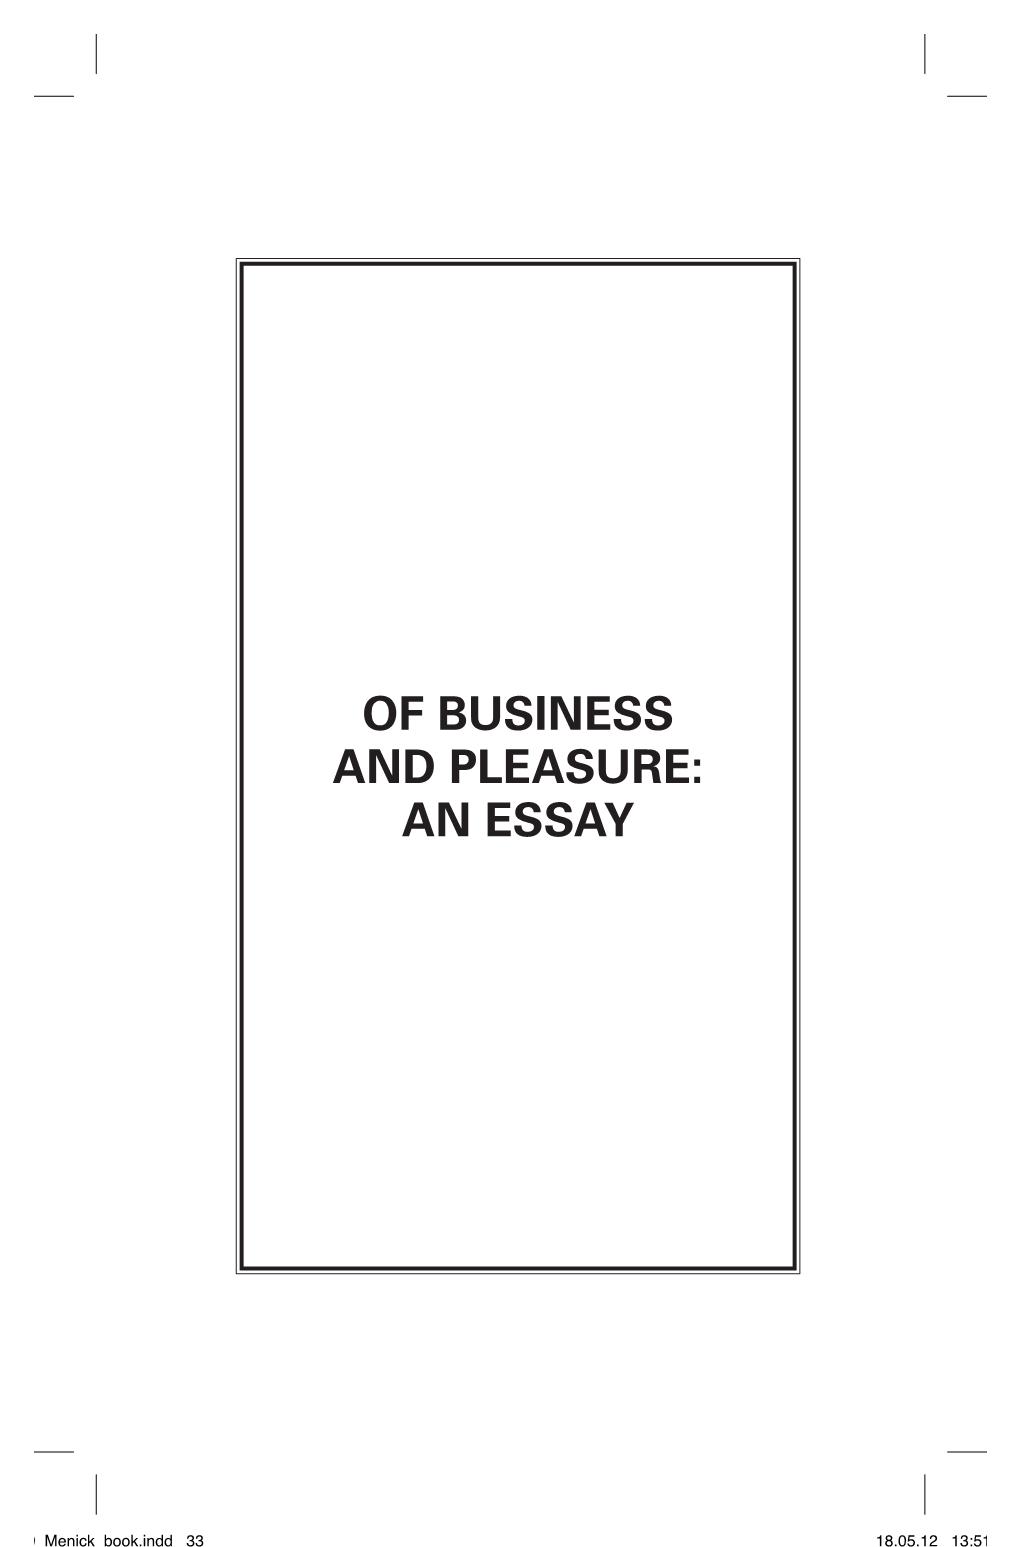 Of Business and Pleasure